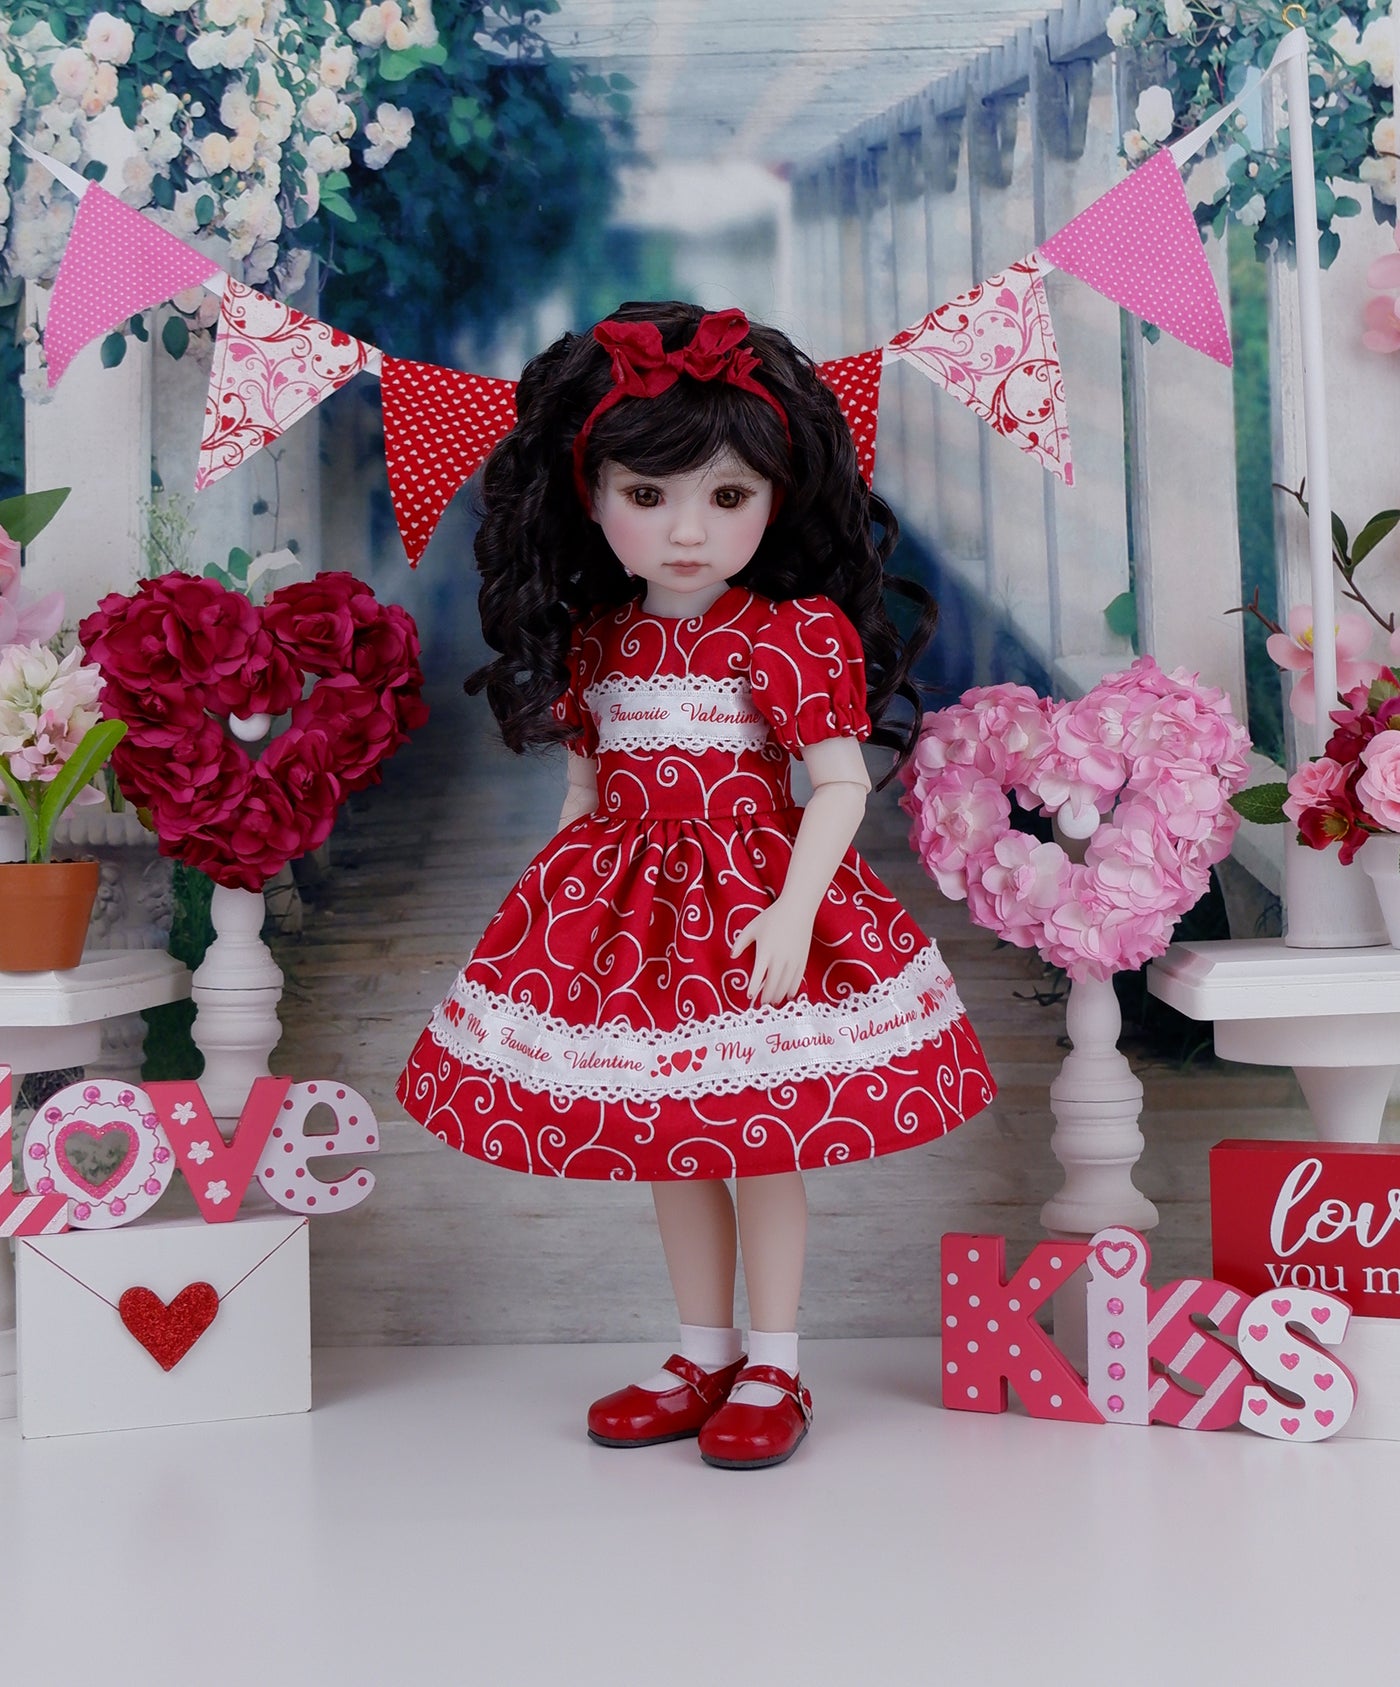 My Favorite Valentine - dress with shoes for Ruby Red Fashion Friends doll